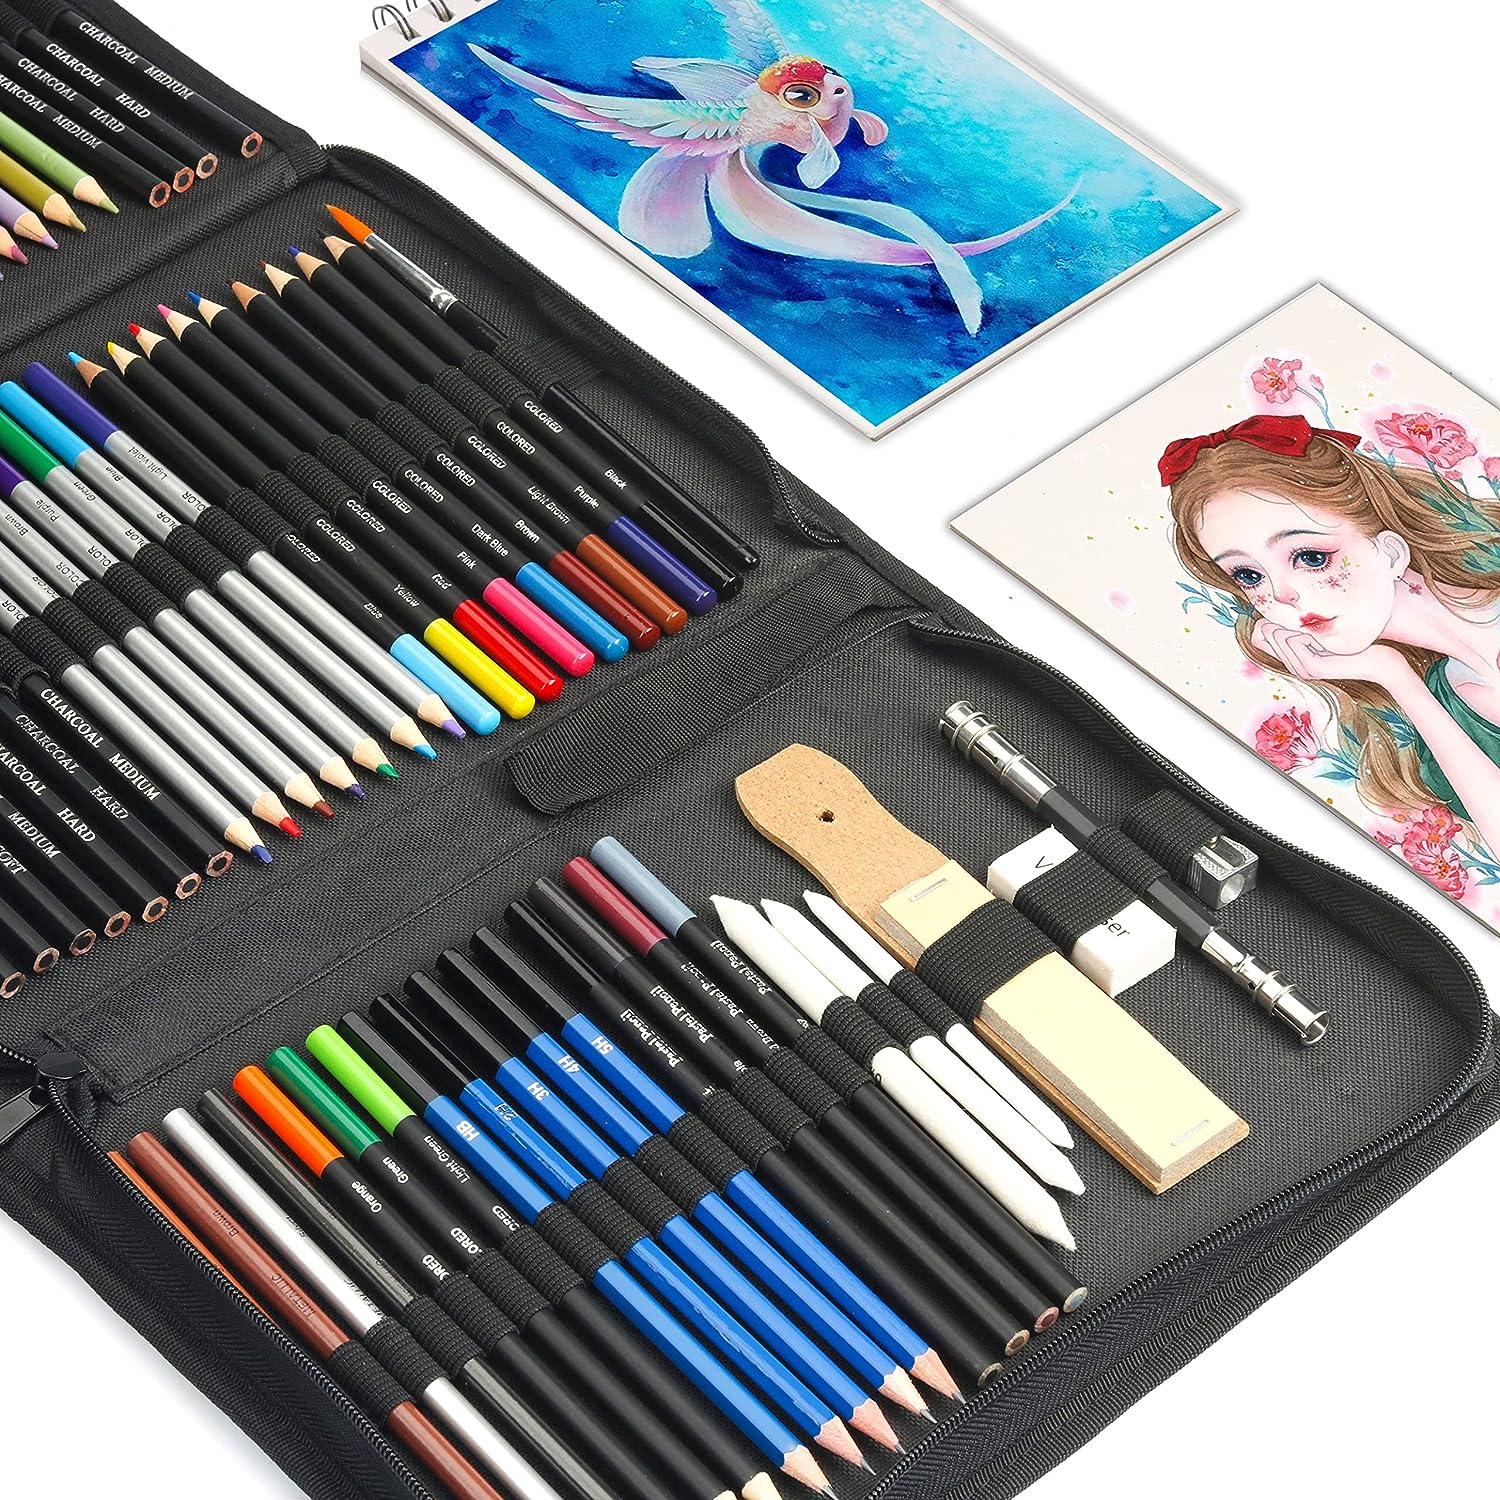 KALOUR 72-Pack Sketch Drawing Pencils Kit with Sketchbook and 3-color  Drawing Paper,Tin Box,Include Graphite,Charcoal,Drawing Glove and Artists